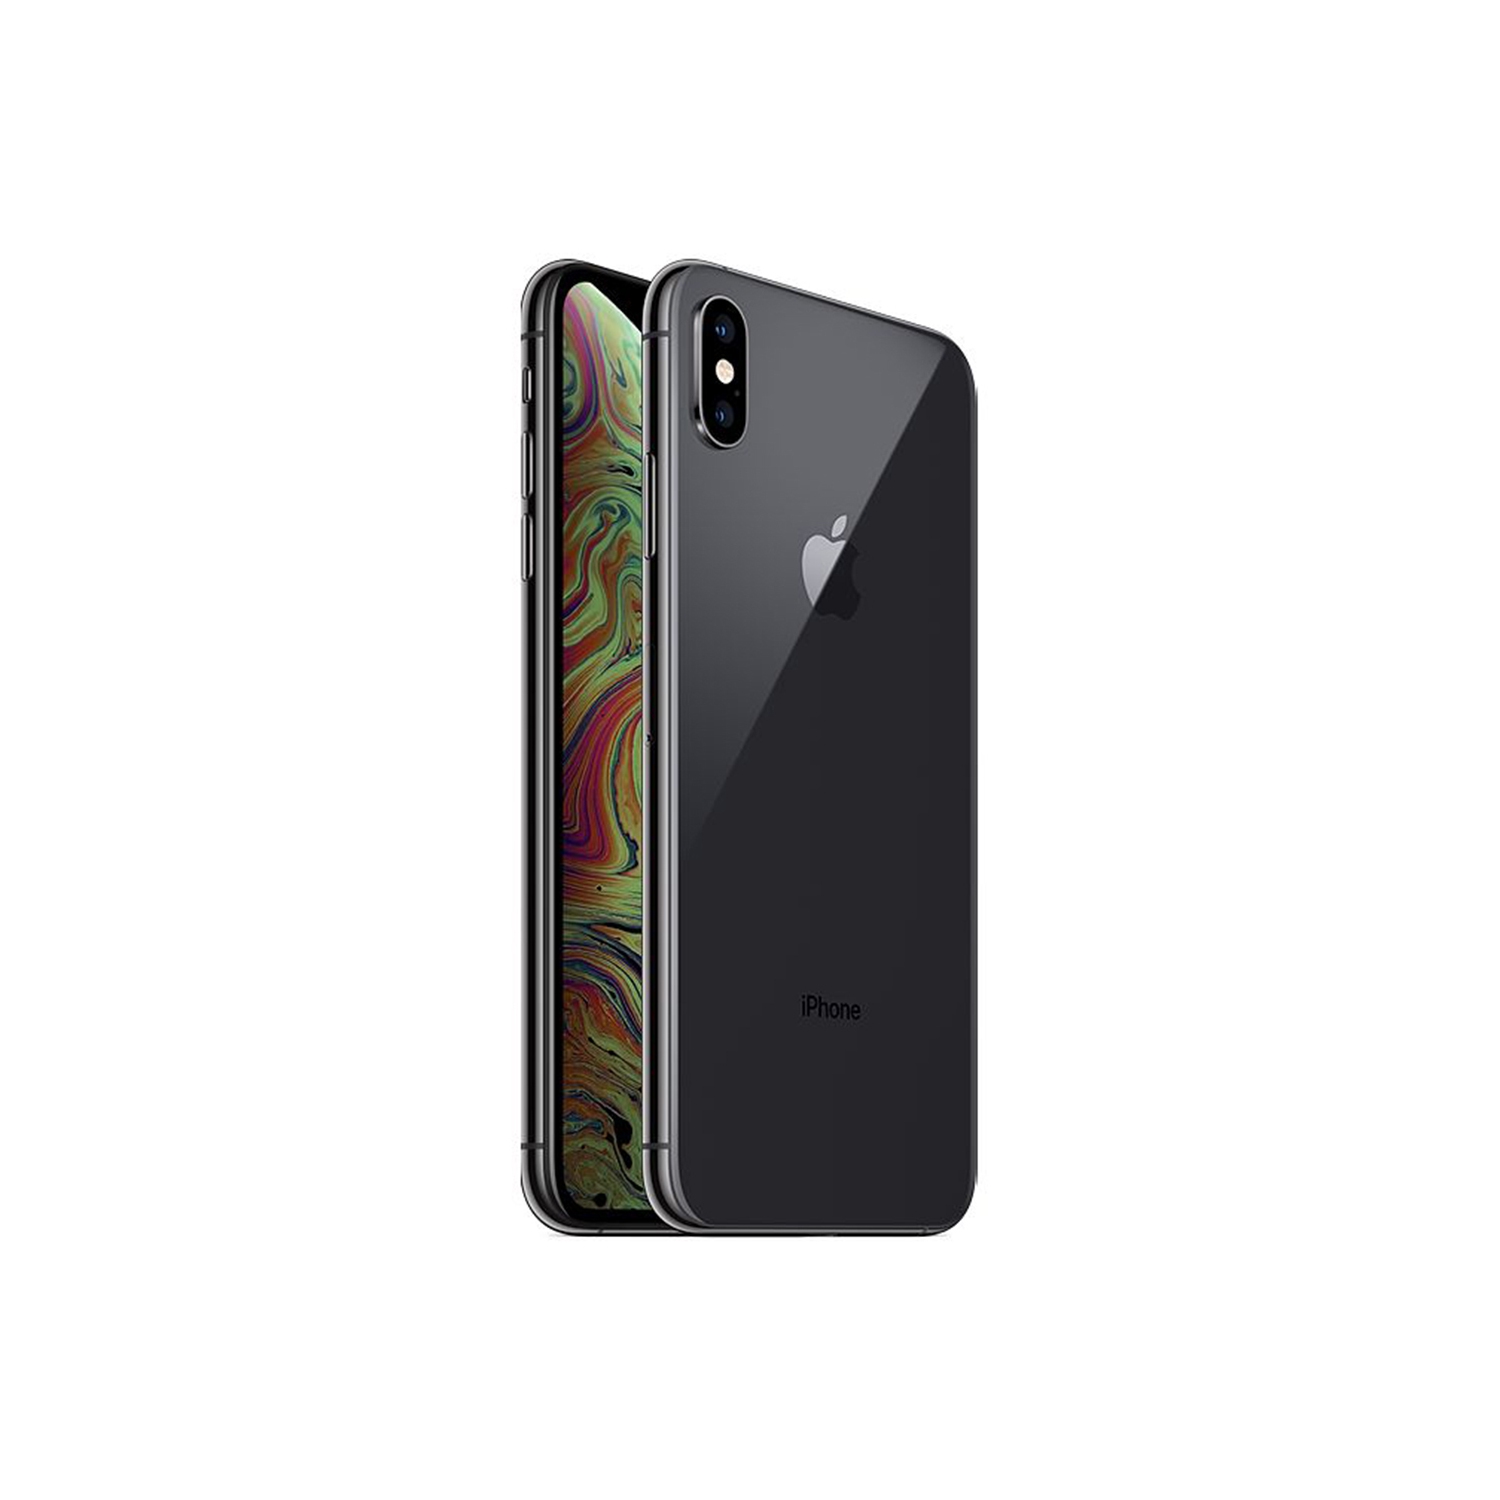 Apple Iphone XS 64GB space GRAY BRAND NEW